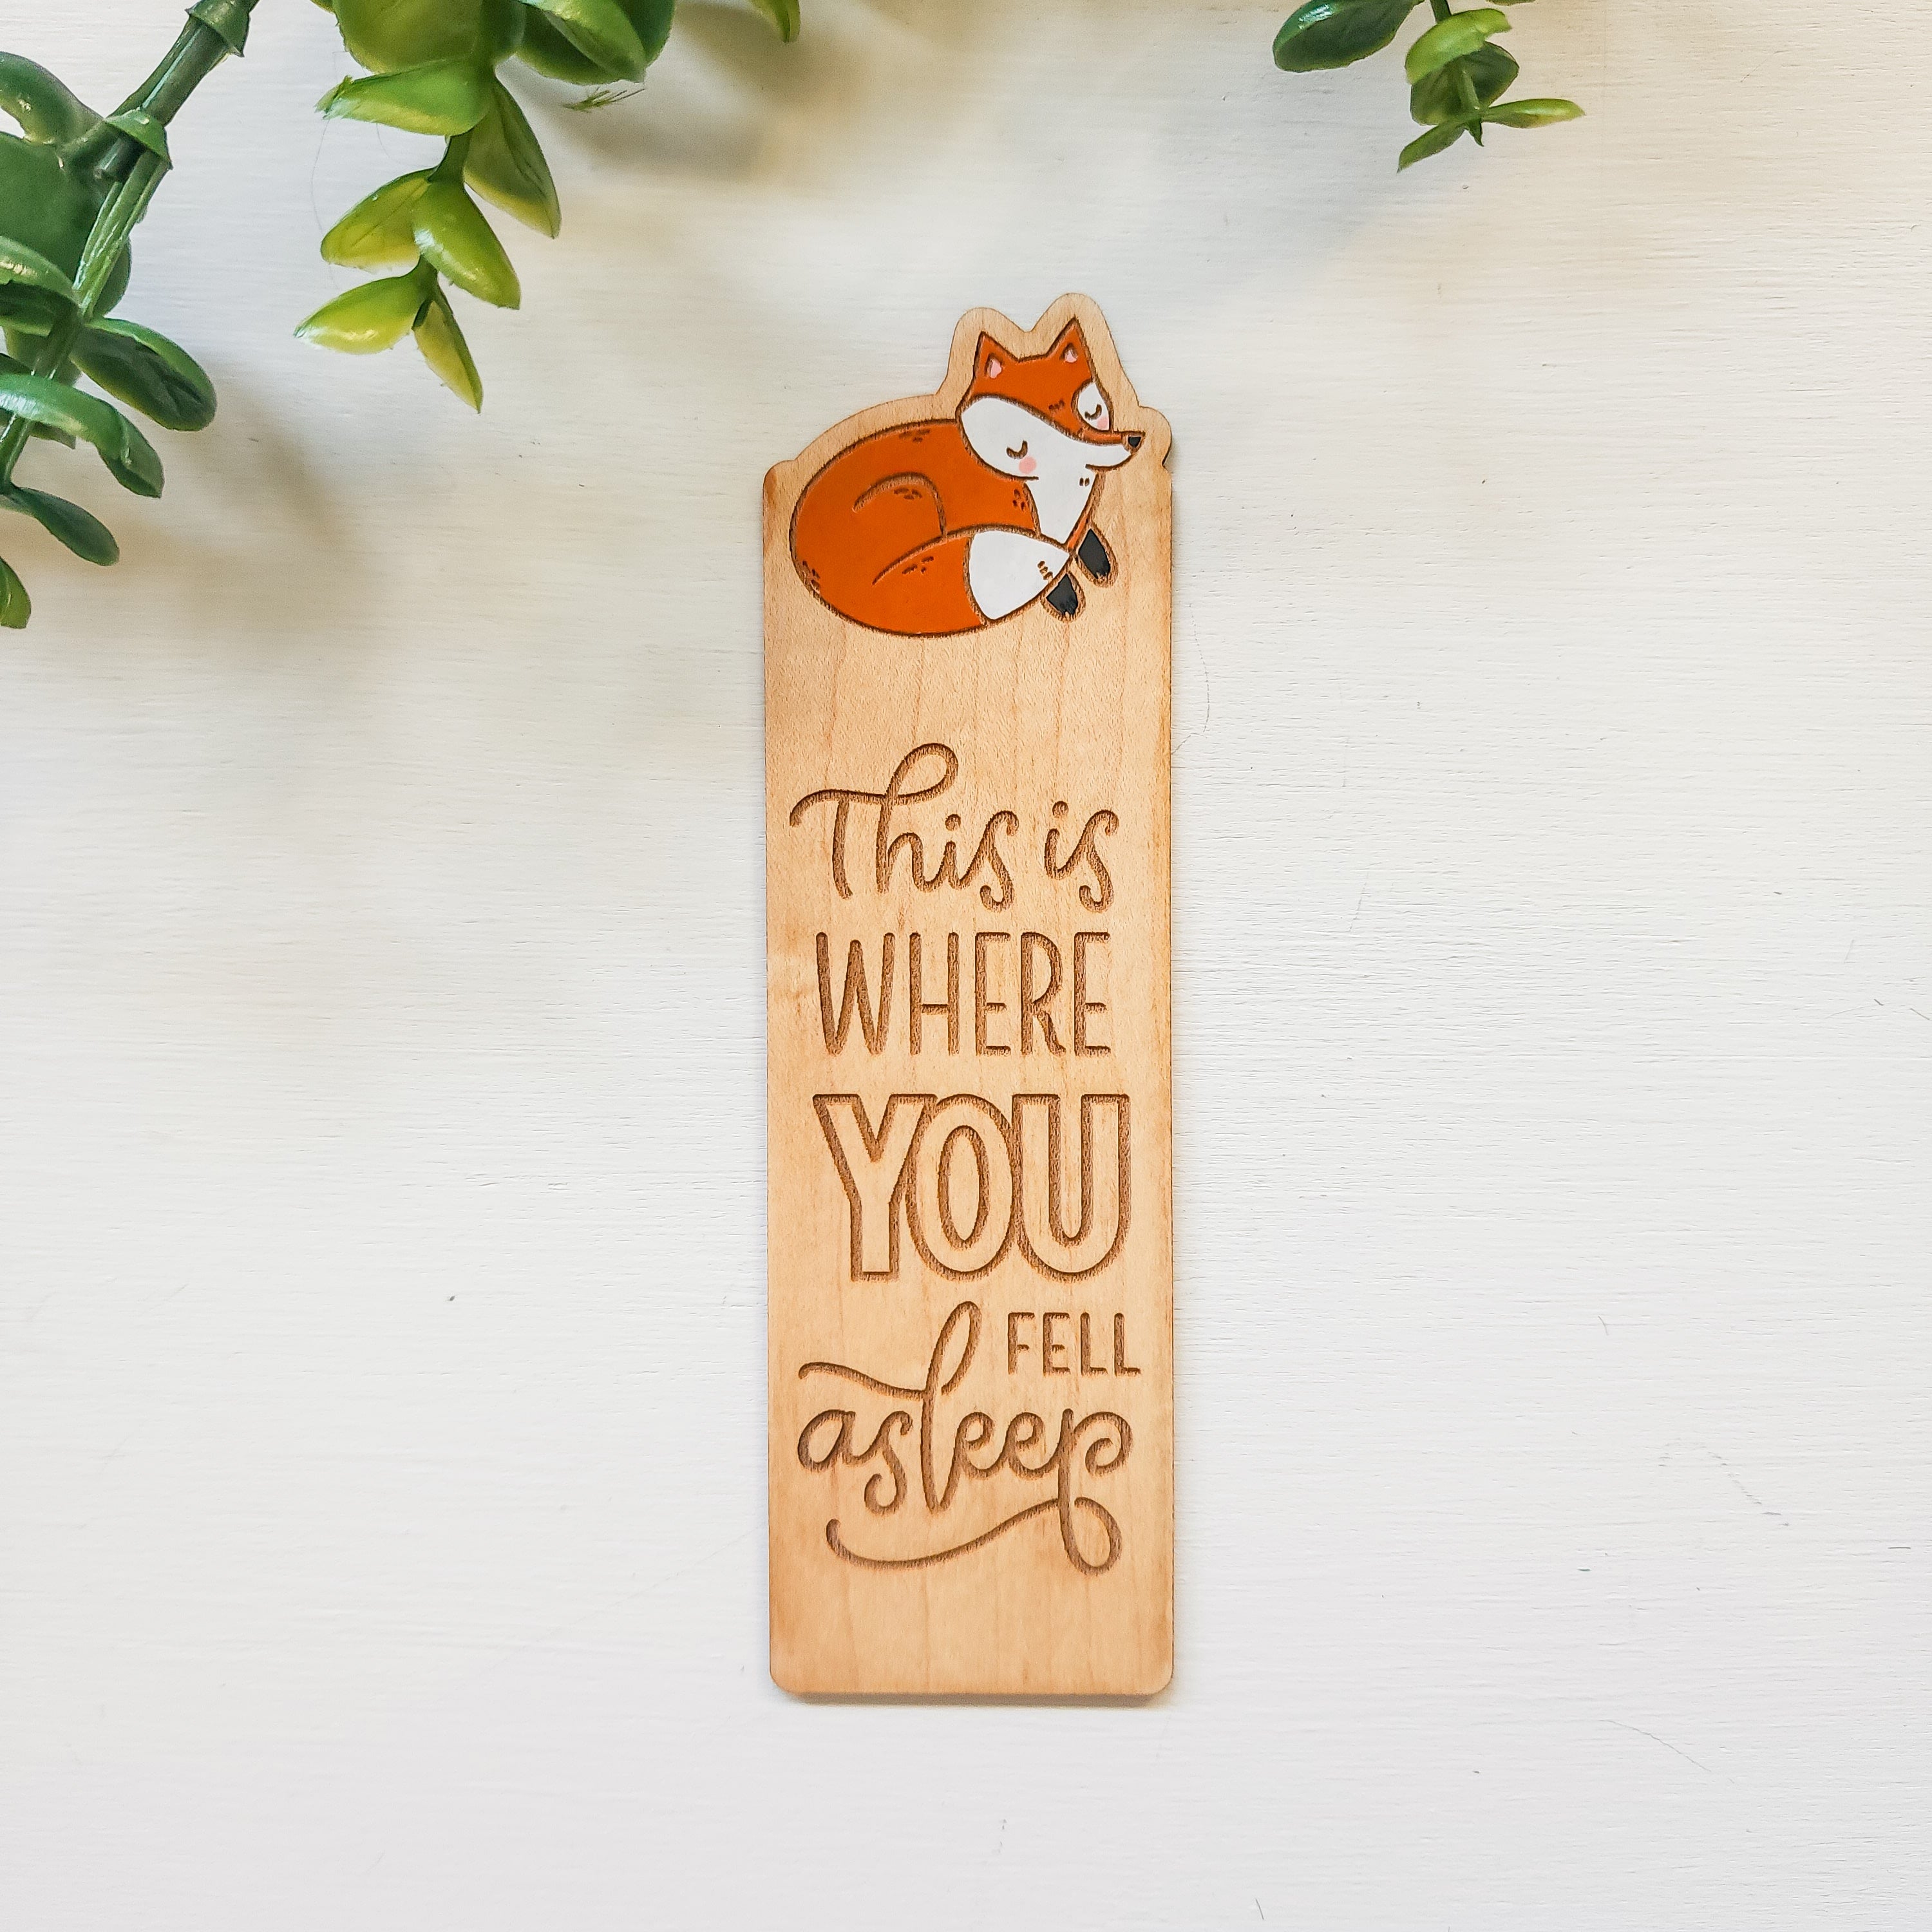 painted wooden fox bookmark that says this engraved with this is where you fell asleep